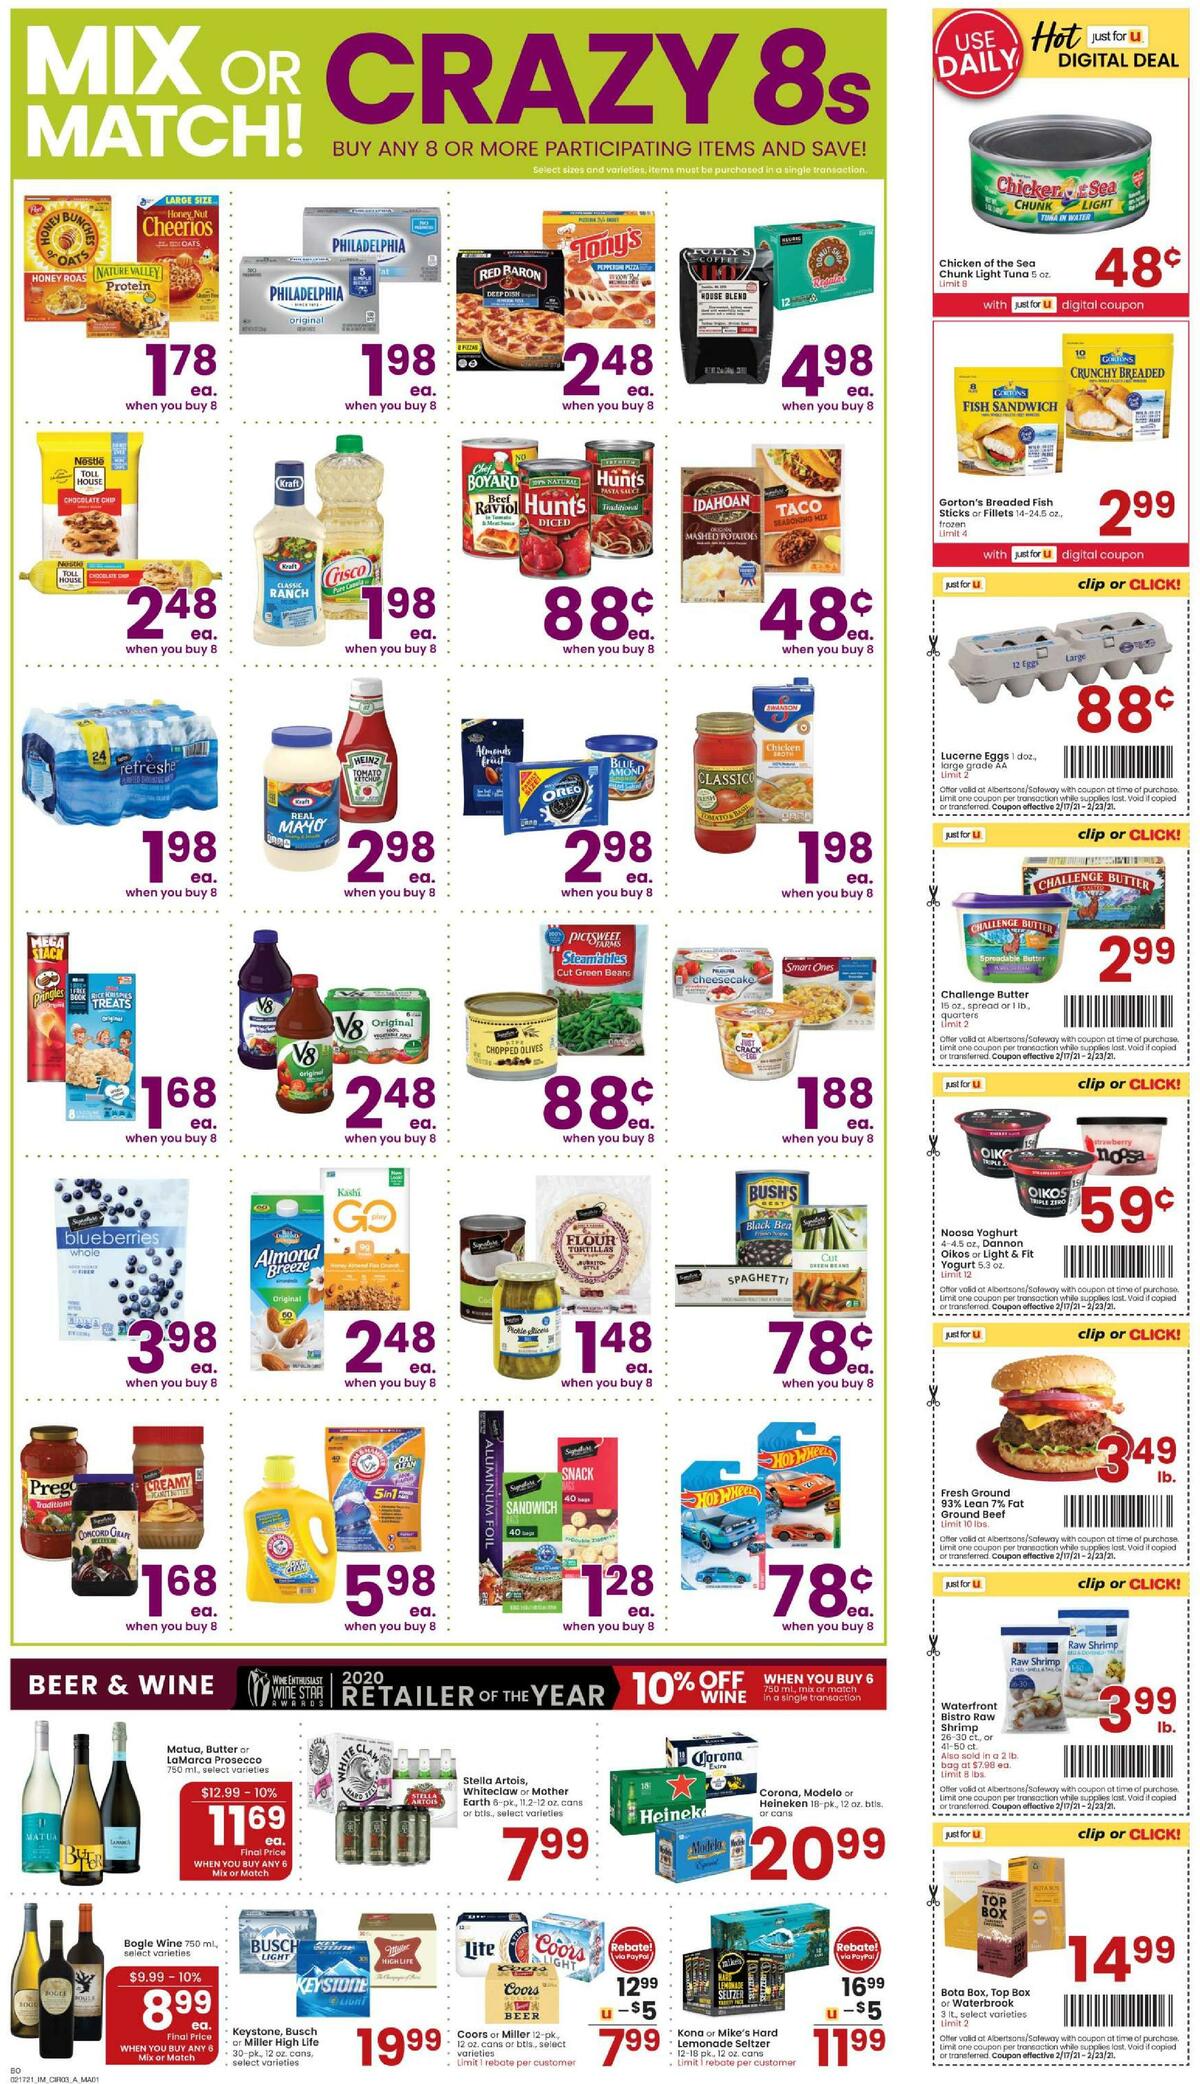 Albertsons Weekly Ad from February 17